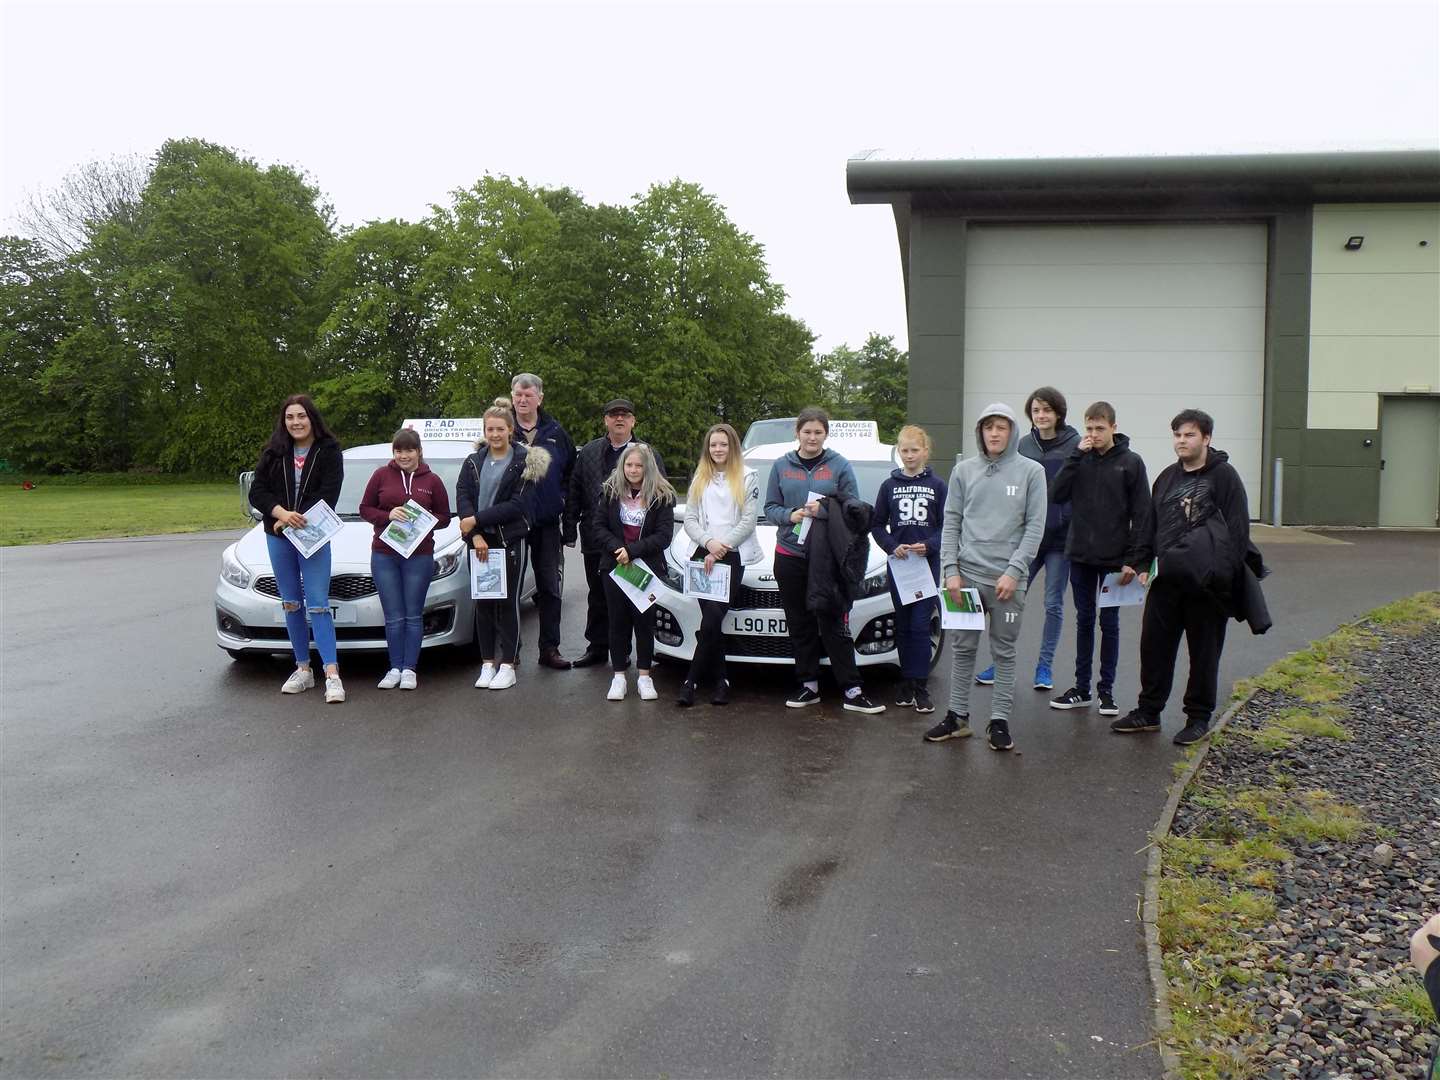 Keith youngsters taking part in the Rrrrallye Youth Drive, from left, Eilidh Milne, Kelly MacWilliam, Harry McLeod, Cain McKenzie, Catherine McKenzie, Ashleigh Dalgarno, Kaiden Morrison, Isla Henderson, Jordan Gray, Baillie Pirie, Shannon Thain and Lewis Roger.